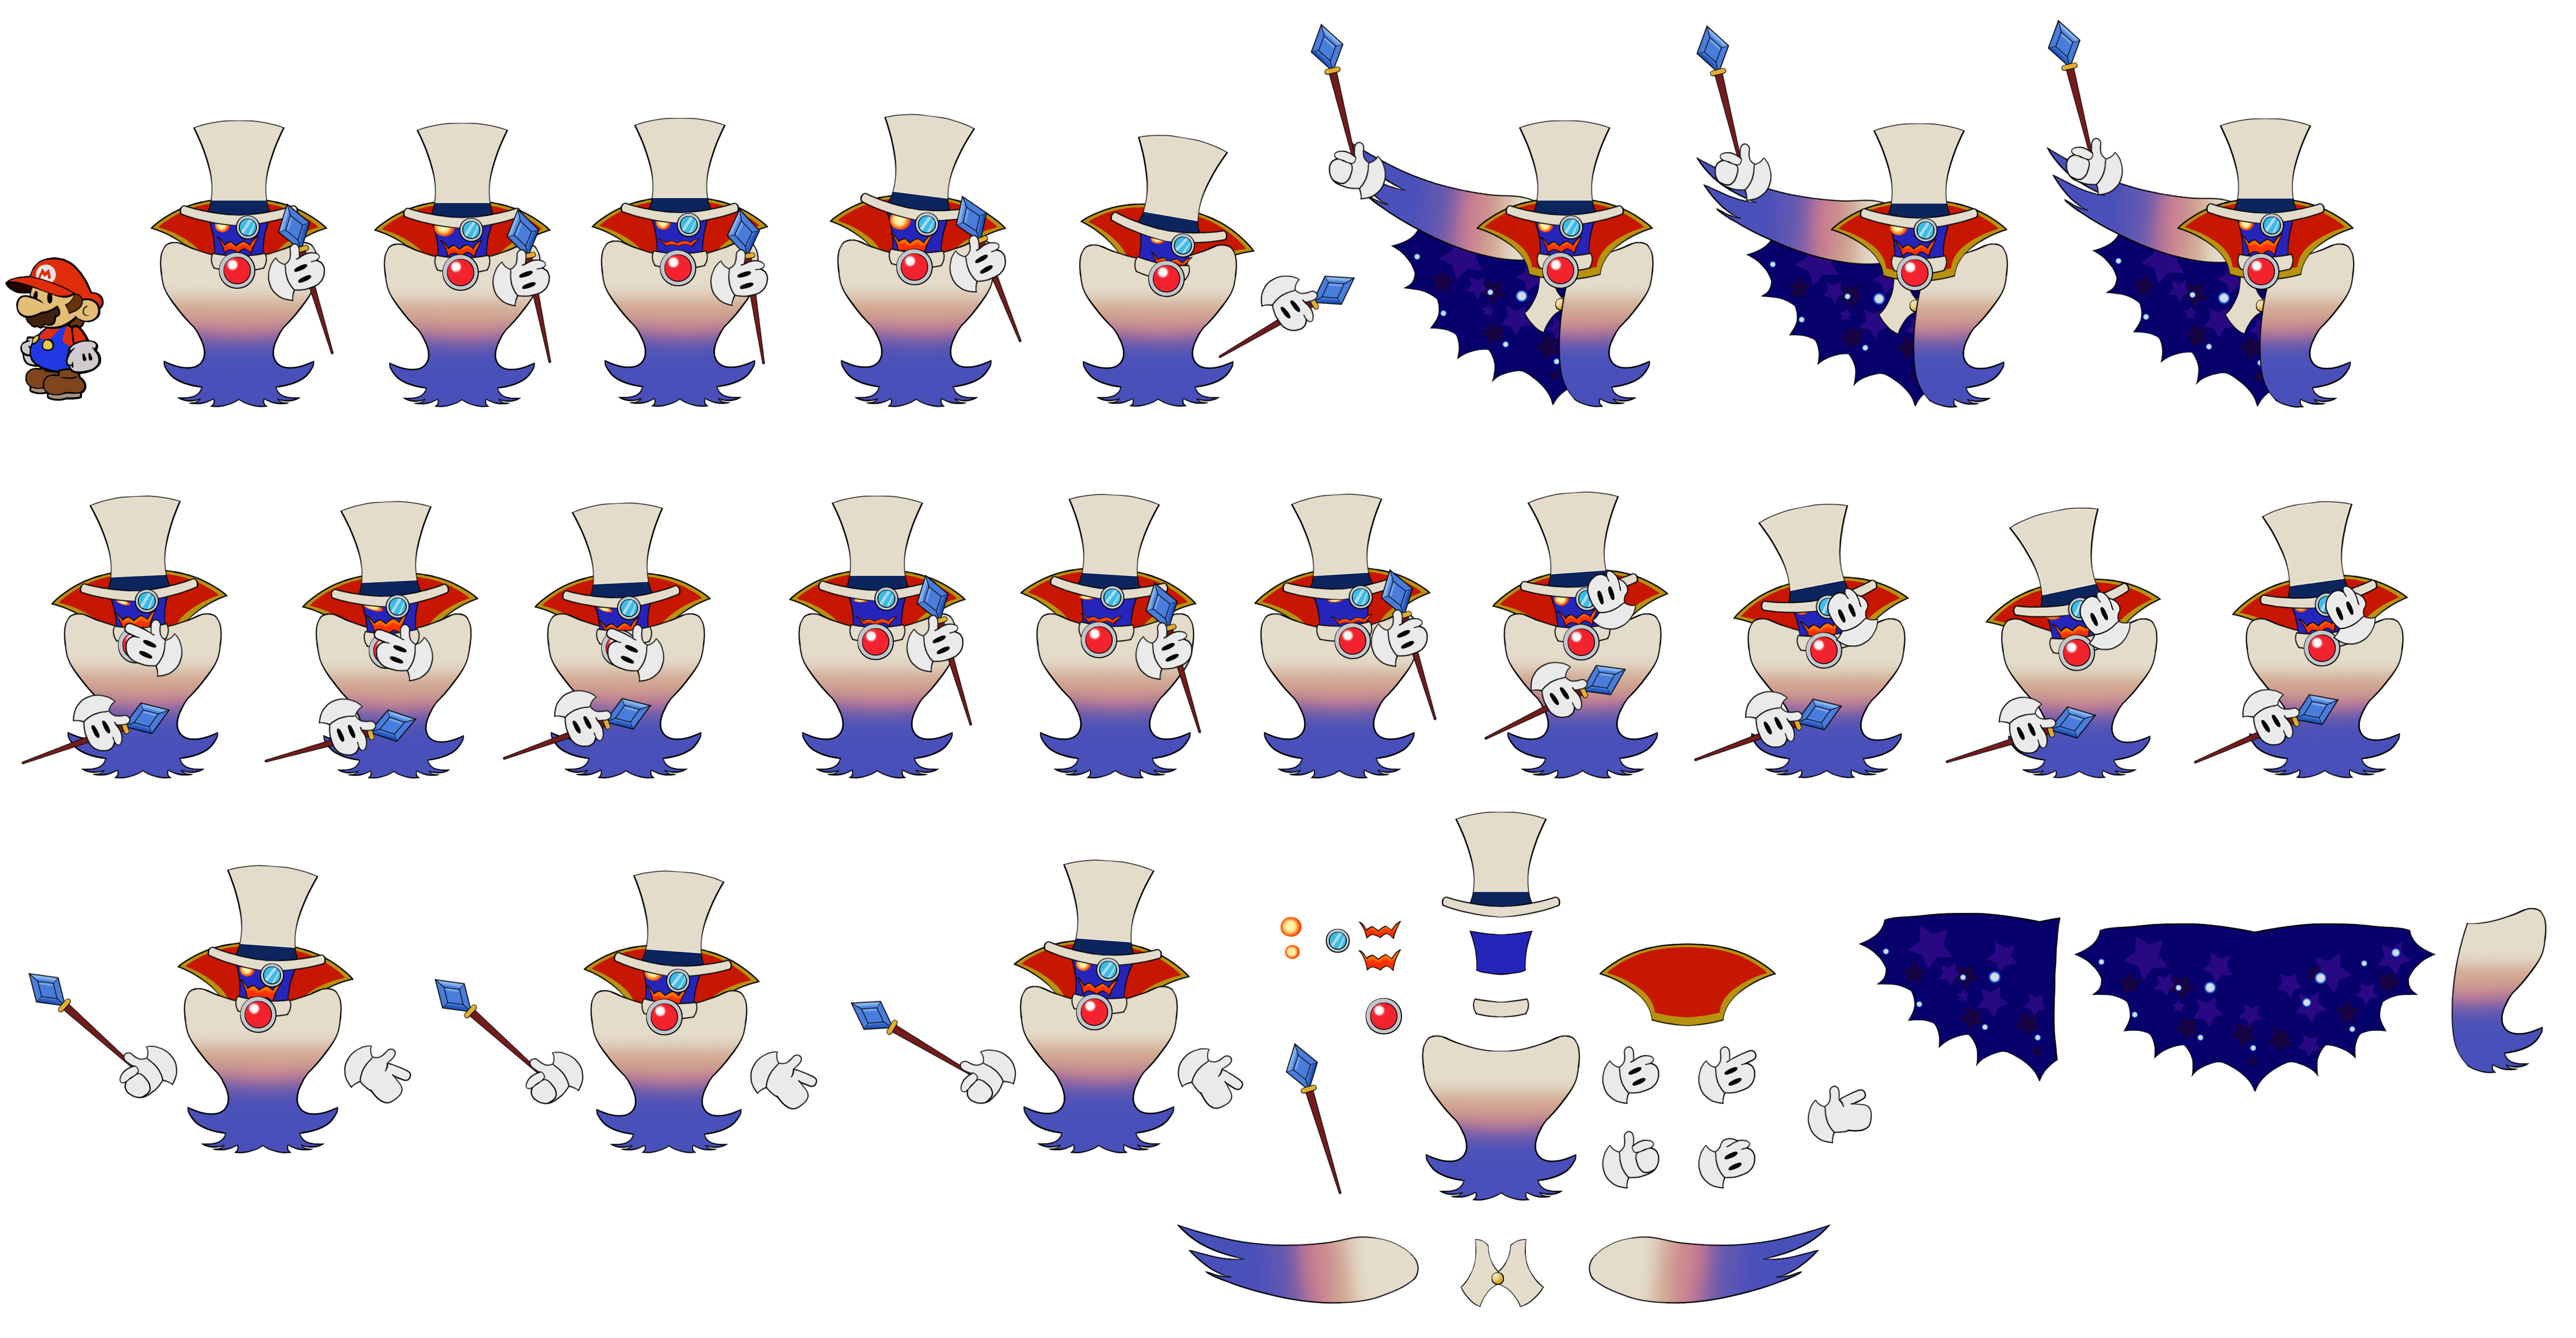 Count Bleck (Paper Mario-Style)